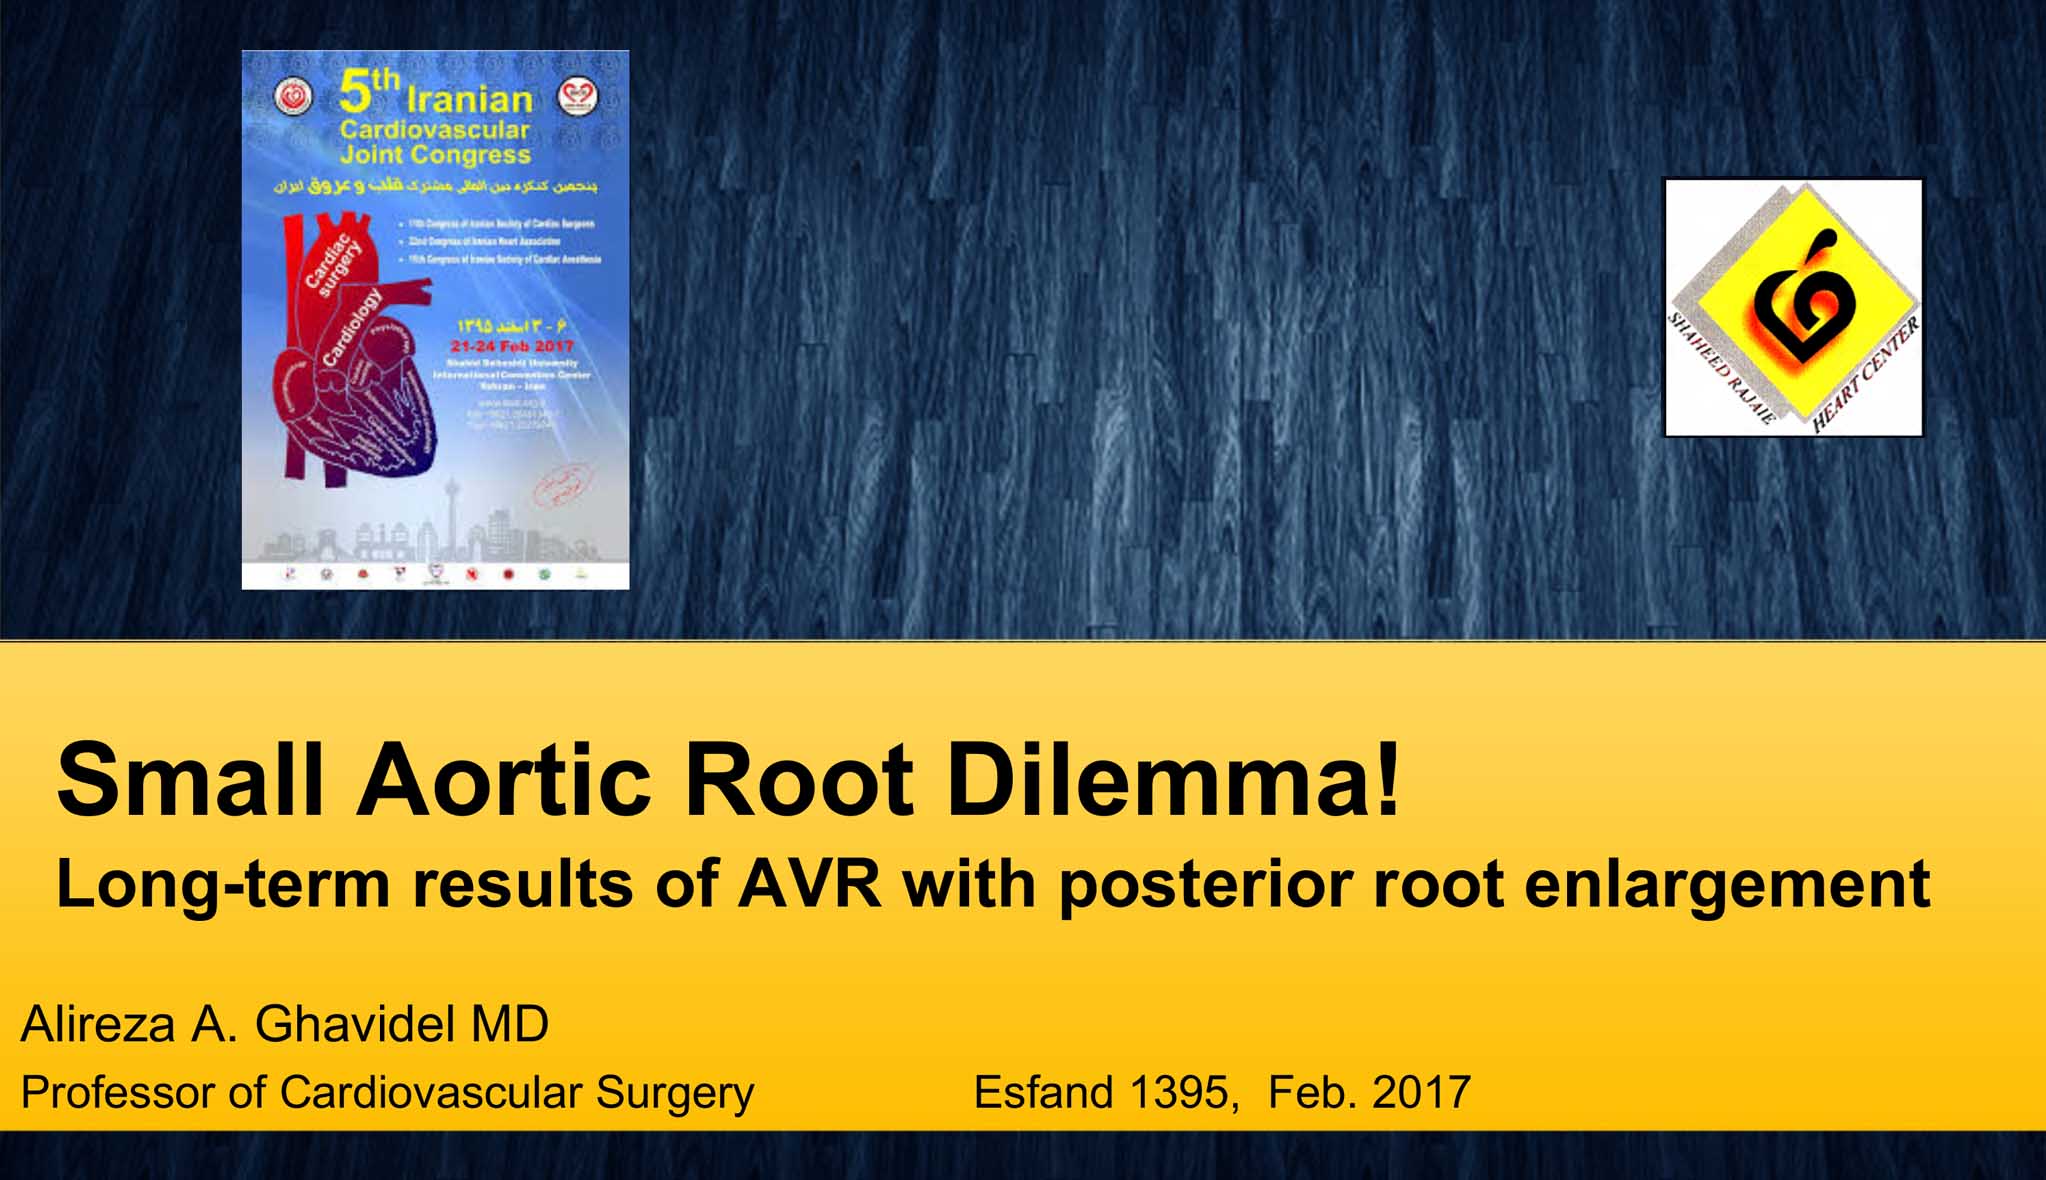 Small Aortic Root Dilemma